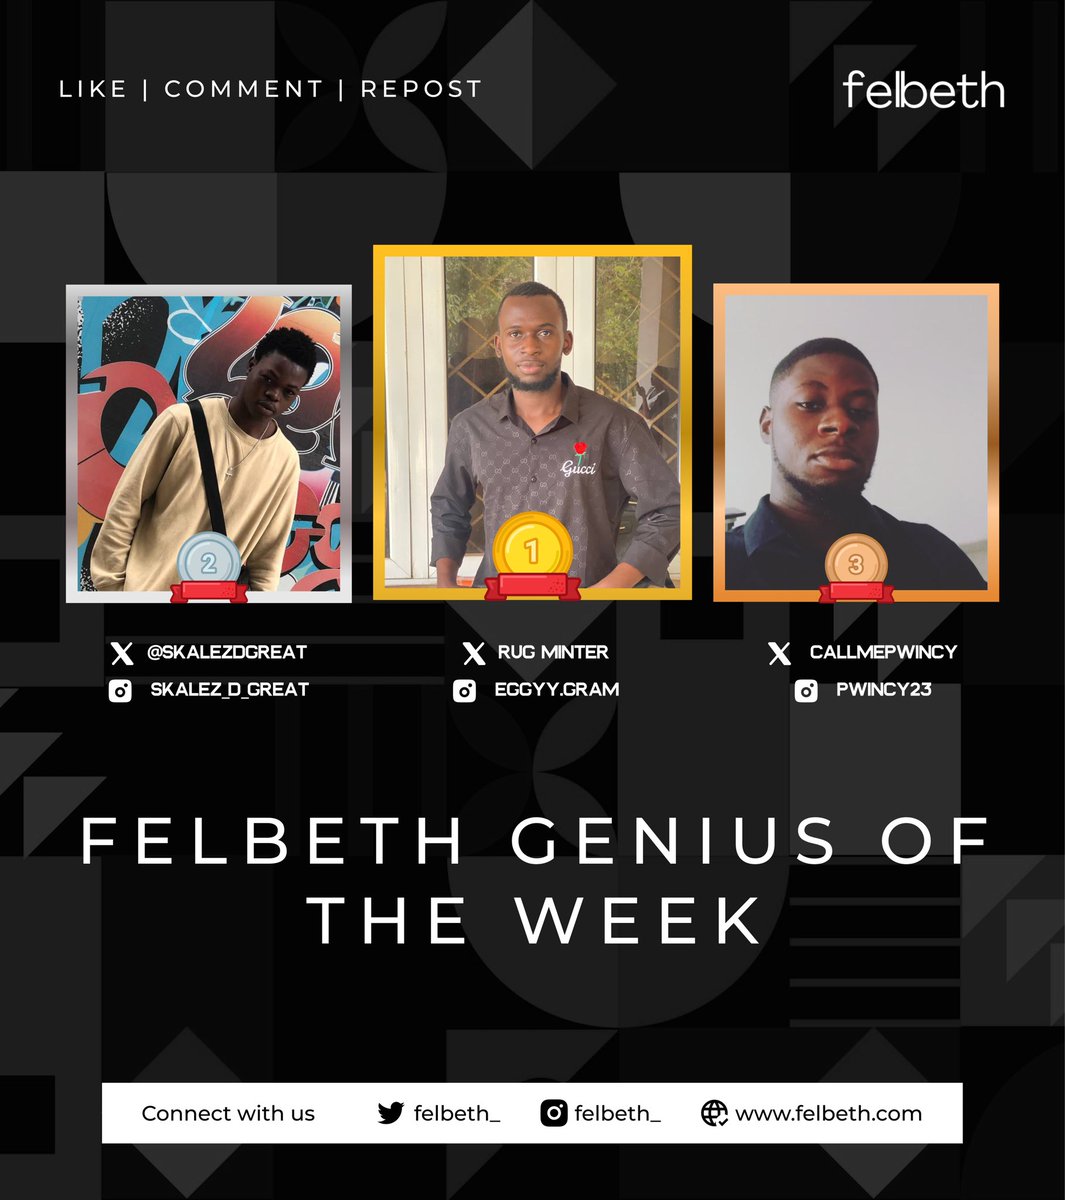 It’s been weeks of playing fun Quiz games in our community 👇 Congratulations to our winners 🥳 @rugminter @skalezDgreat @callmepwincy JOIN IN this week to take part and WIN 🏆 t.me/Felbeth7